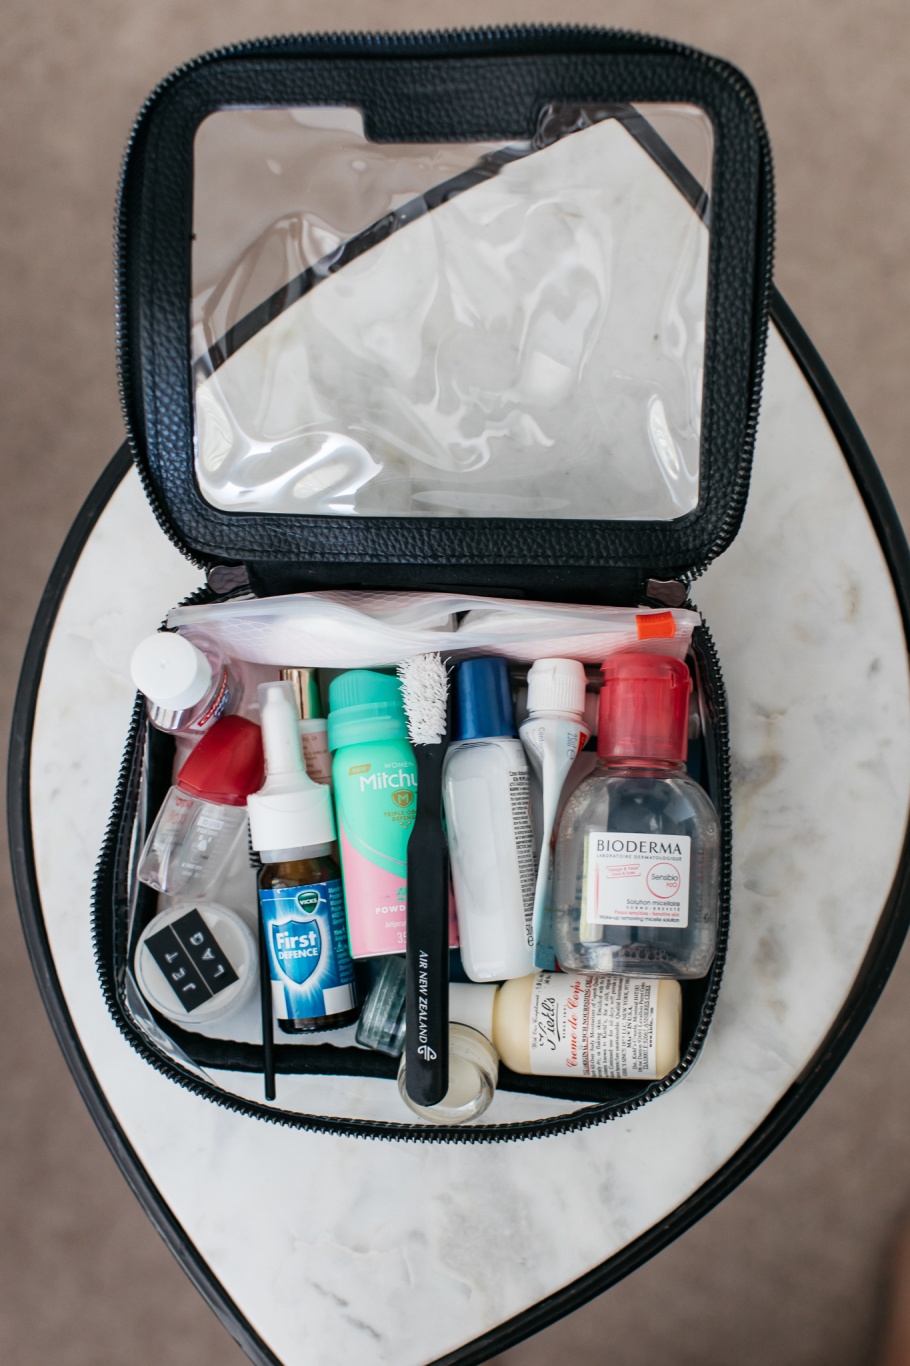 What You Actually Need To Pack Beauty-Wise for a Flight – The Anna